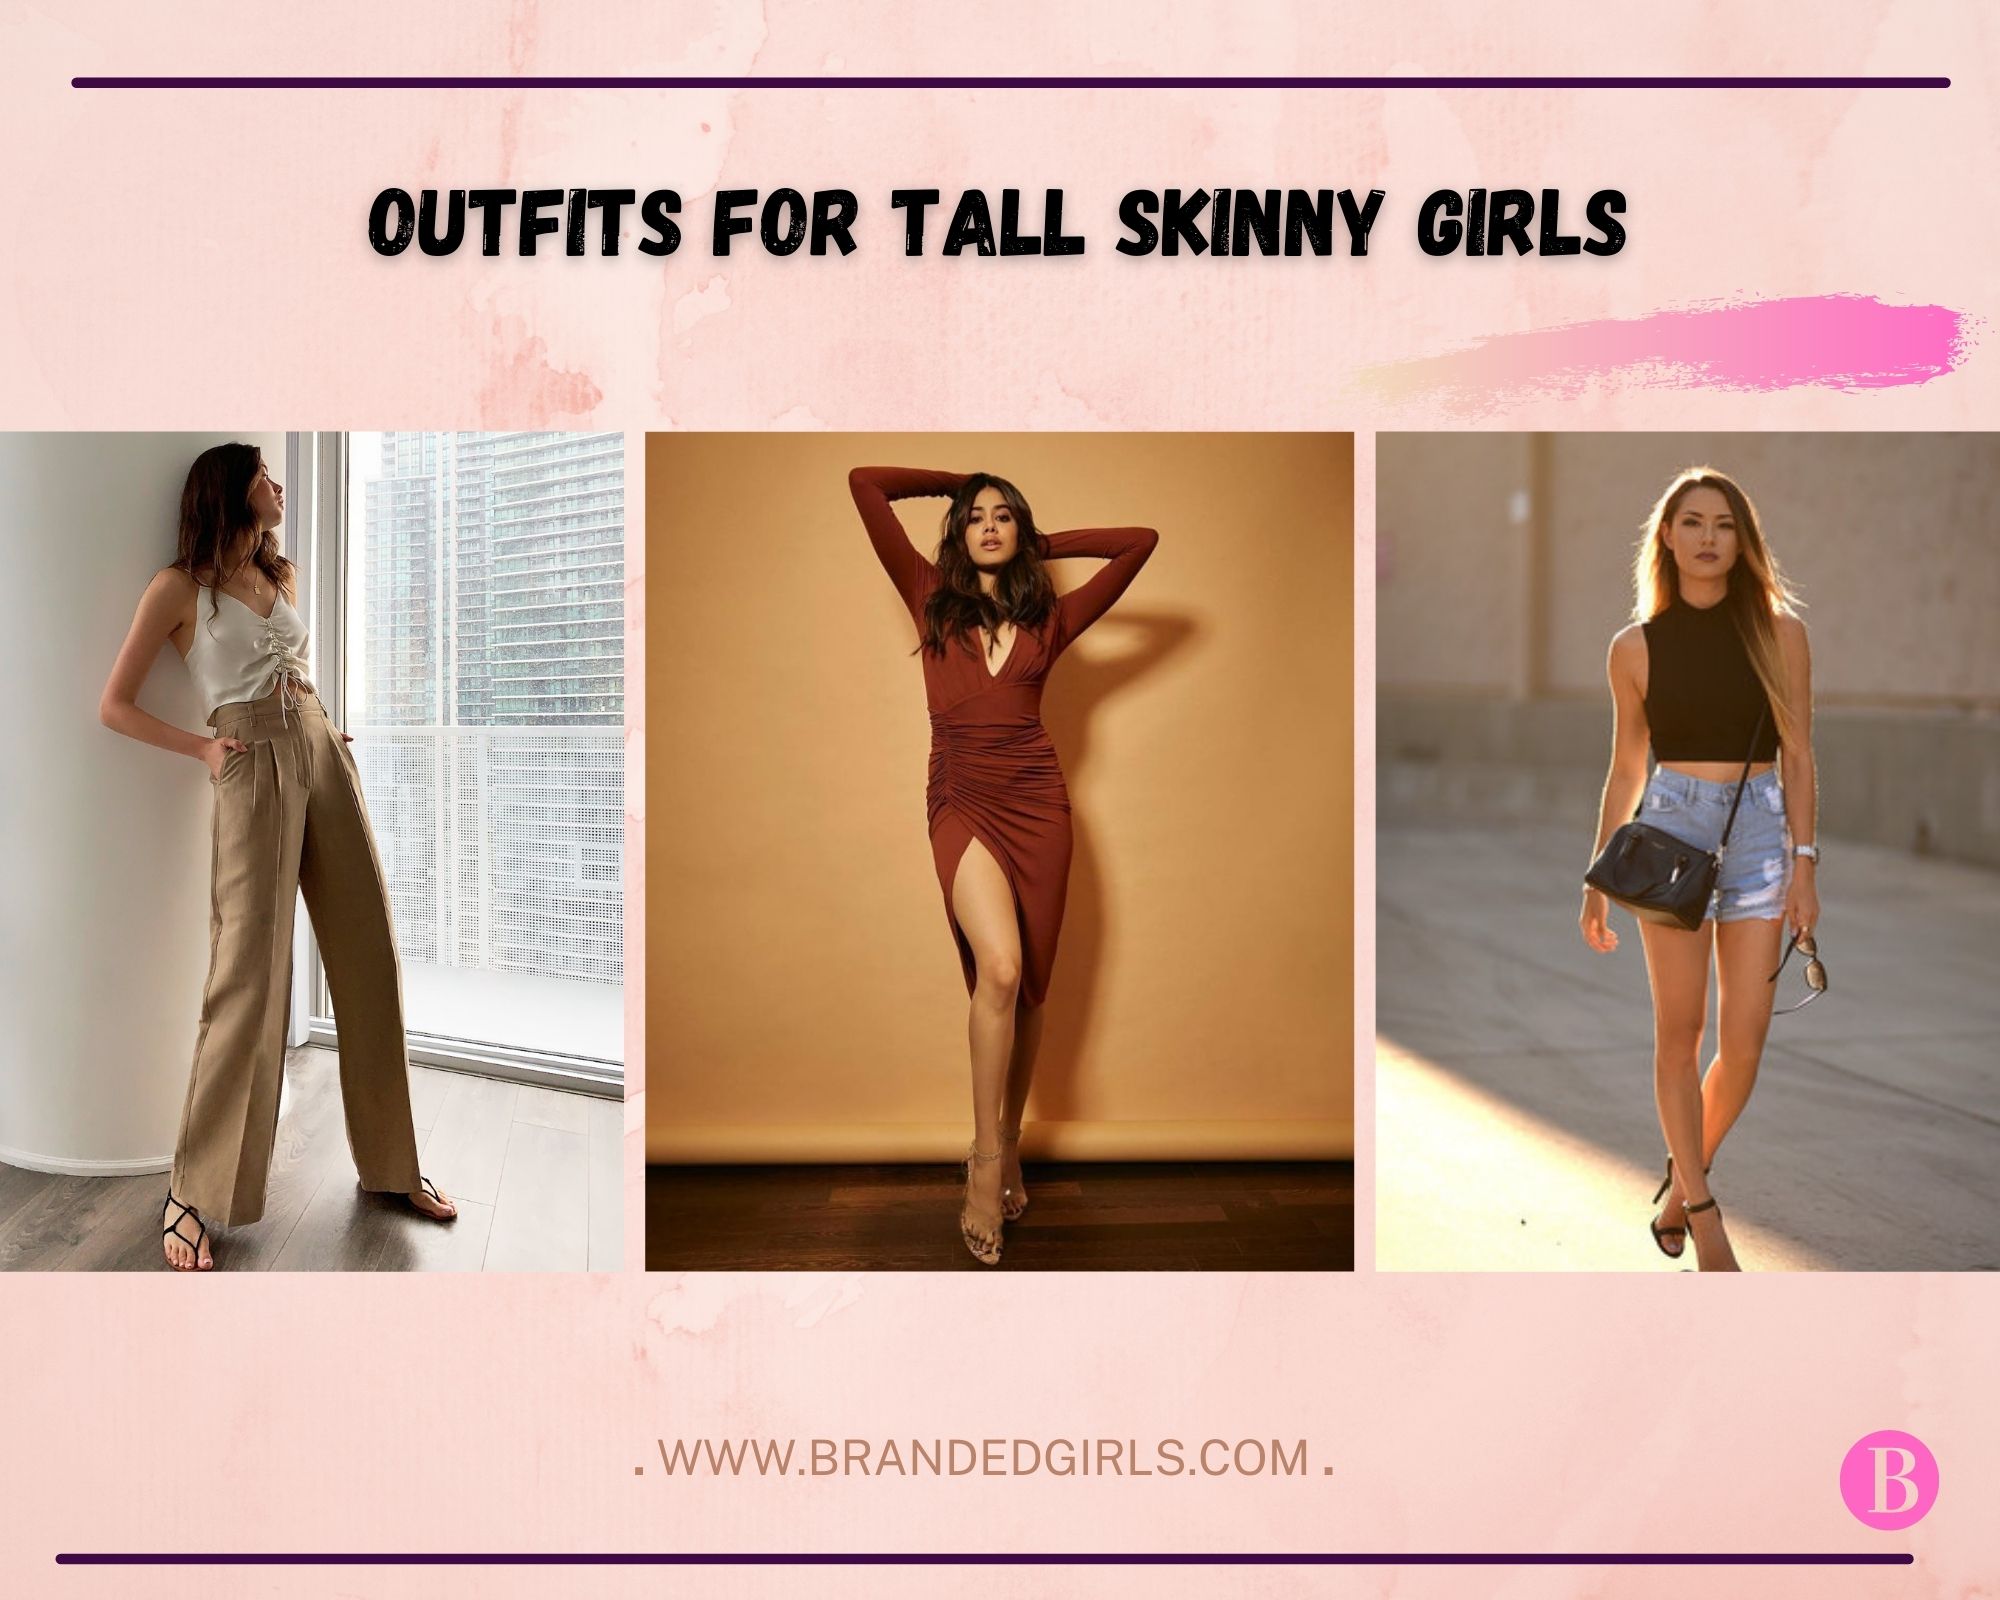 What is the best fashion dress for slim and tall ladies? - Quora